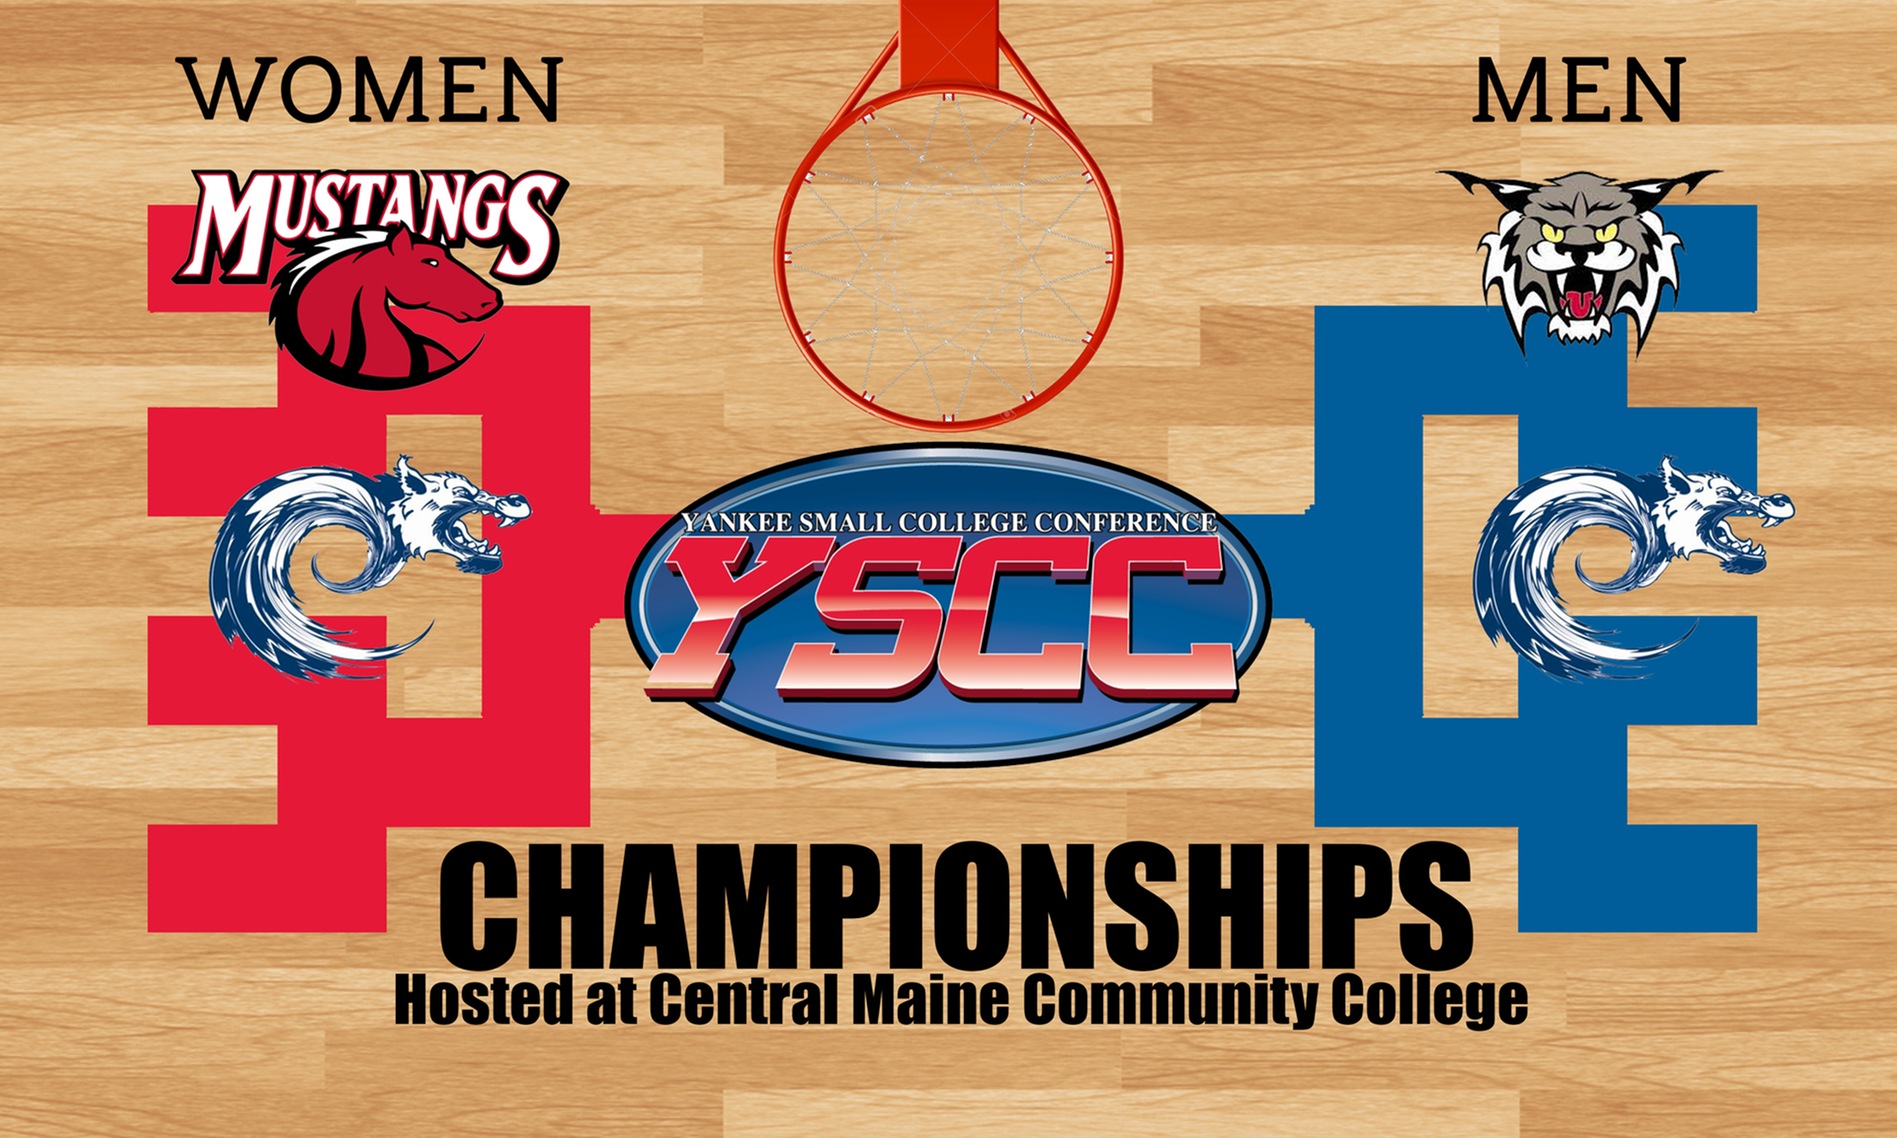 YSCC Championship Sunday tips off at noon